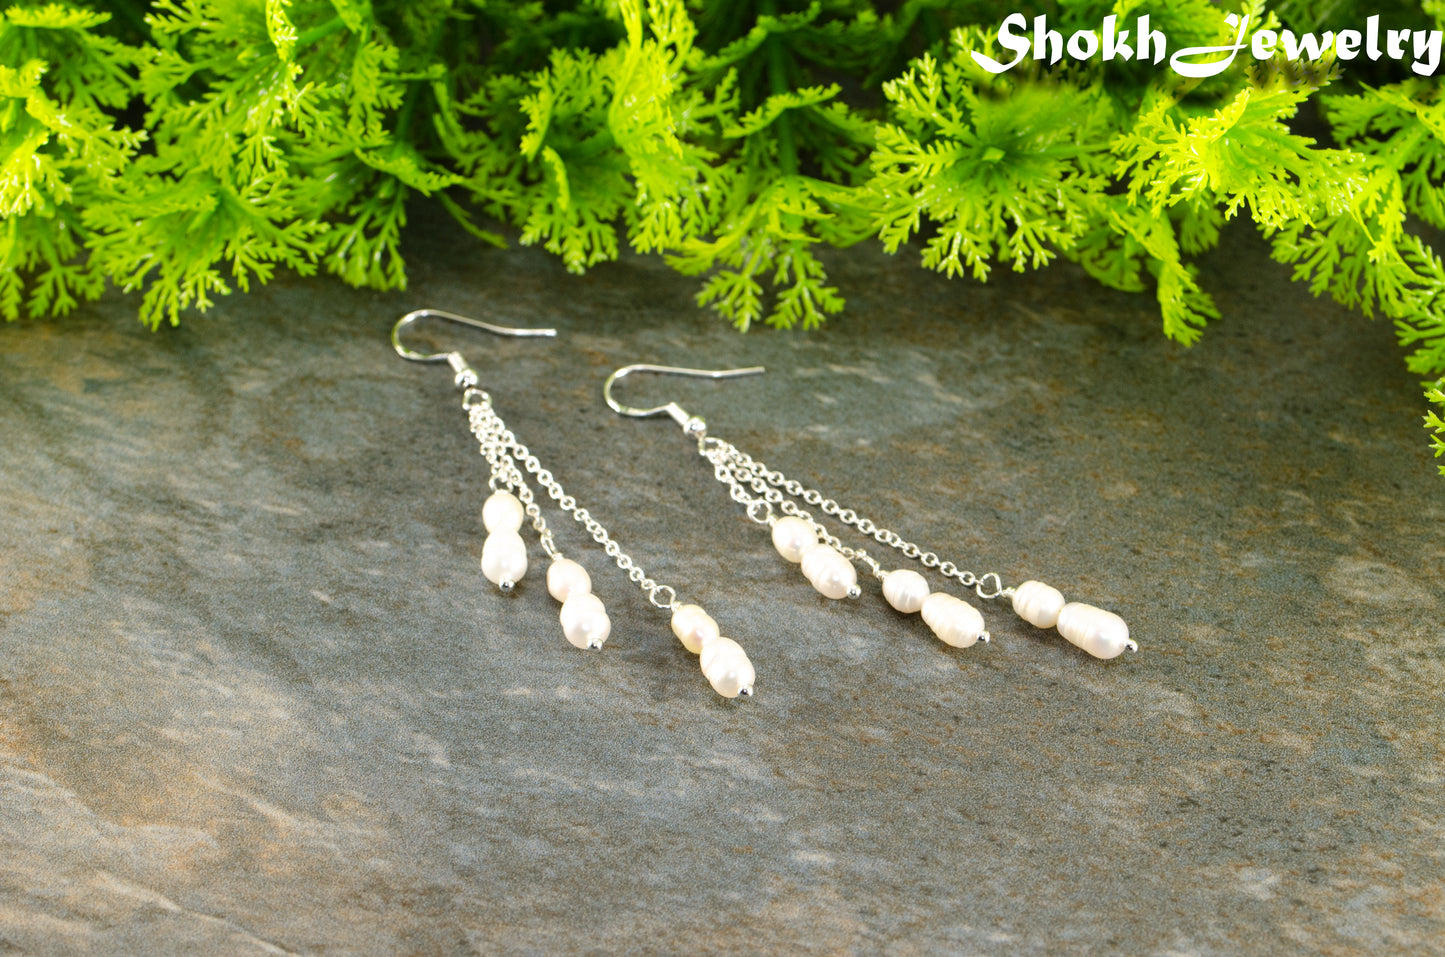 Long Silver Plated Chain and Freshwater Pearl Earrings for women.